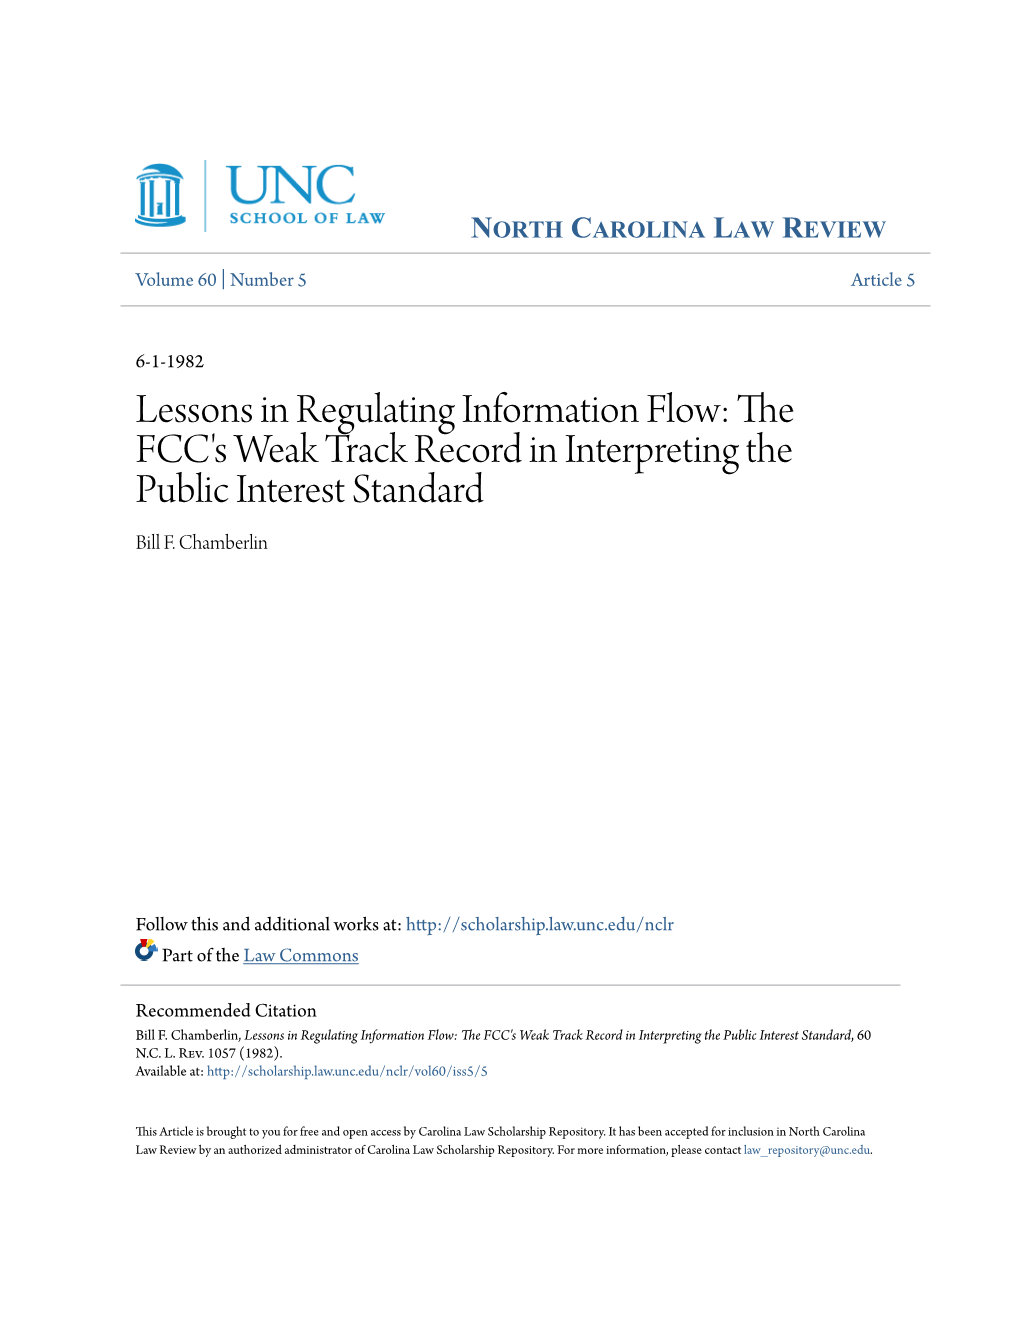 Lessons in Regulating Information Flow: the FCC's Weak Track Record in Interpreting the Public Interest Standard Bill F